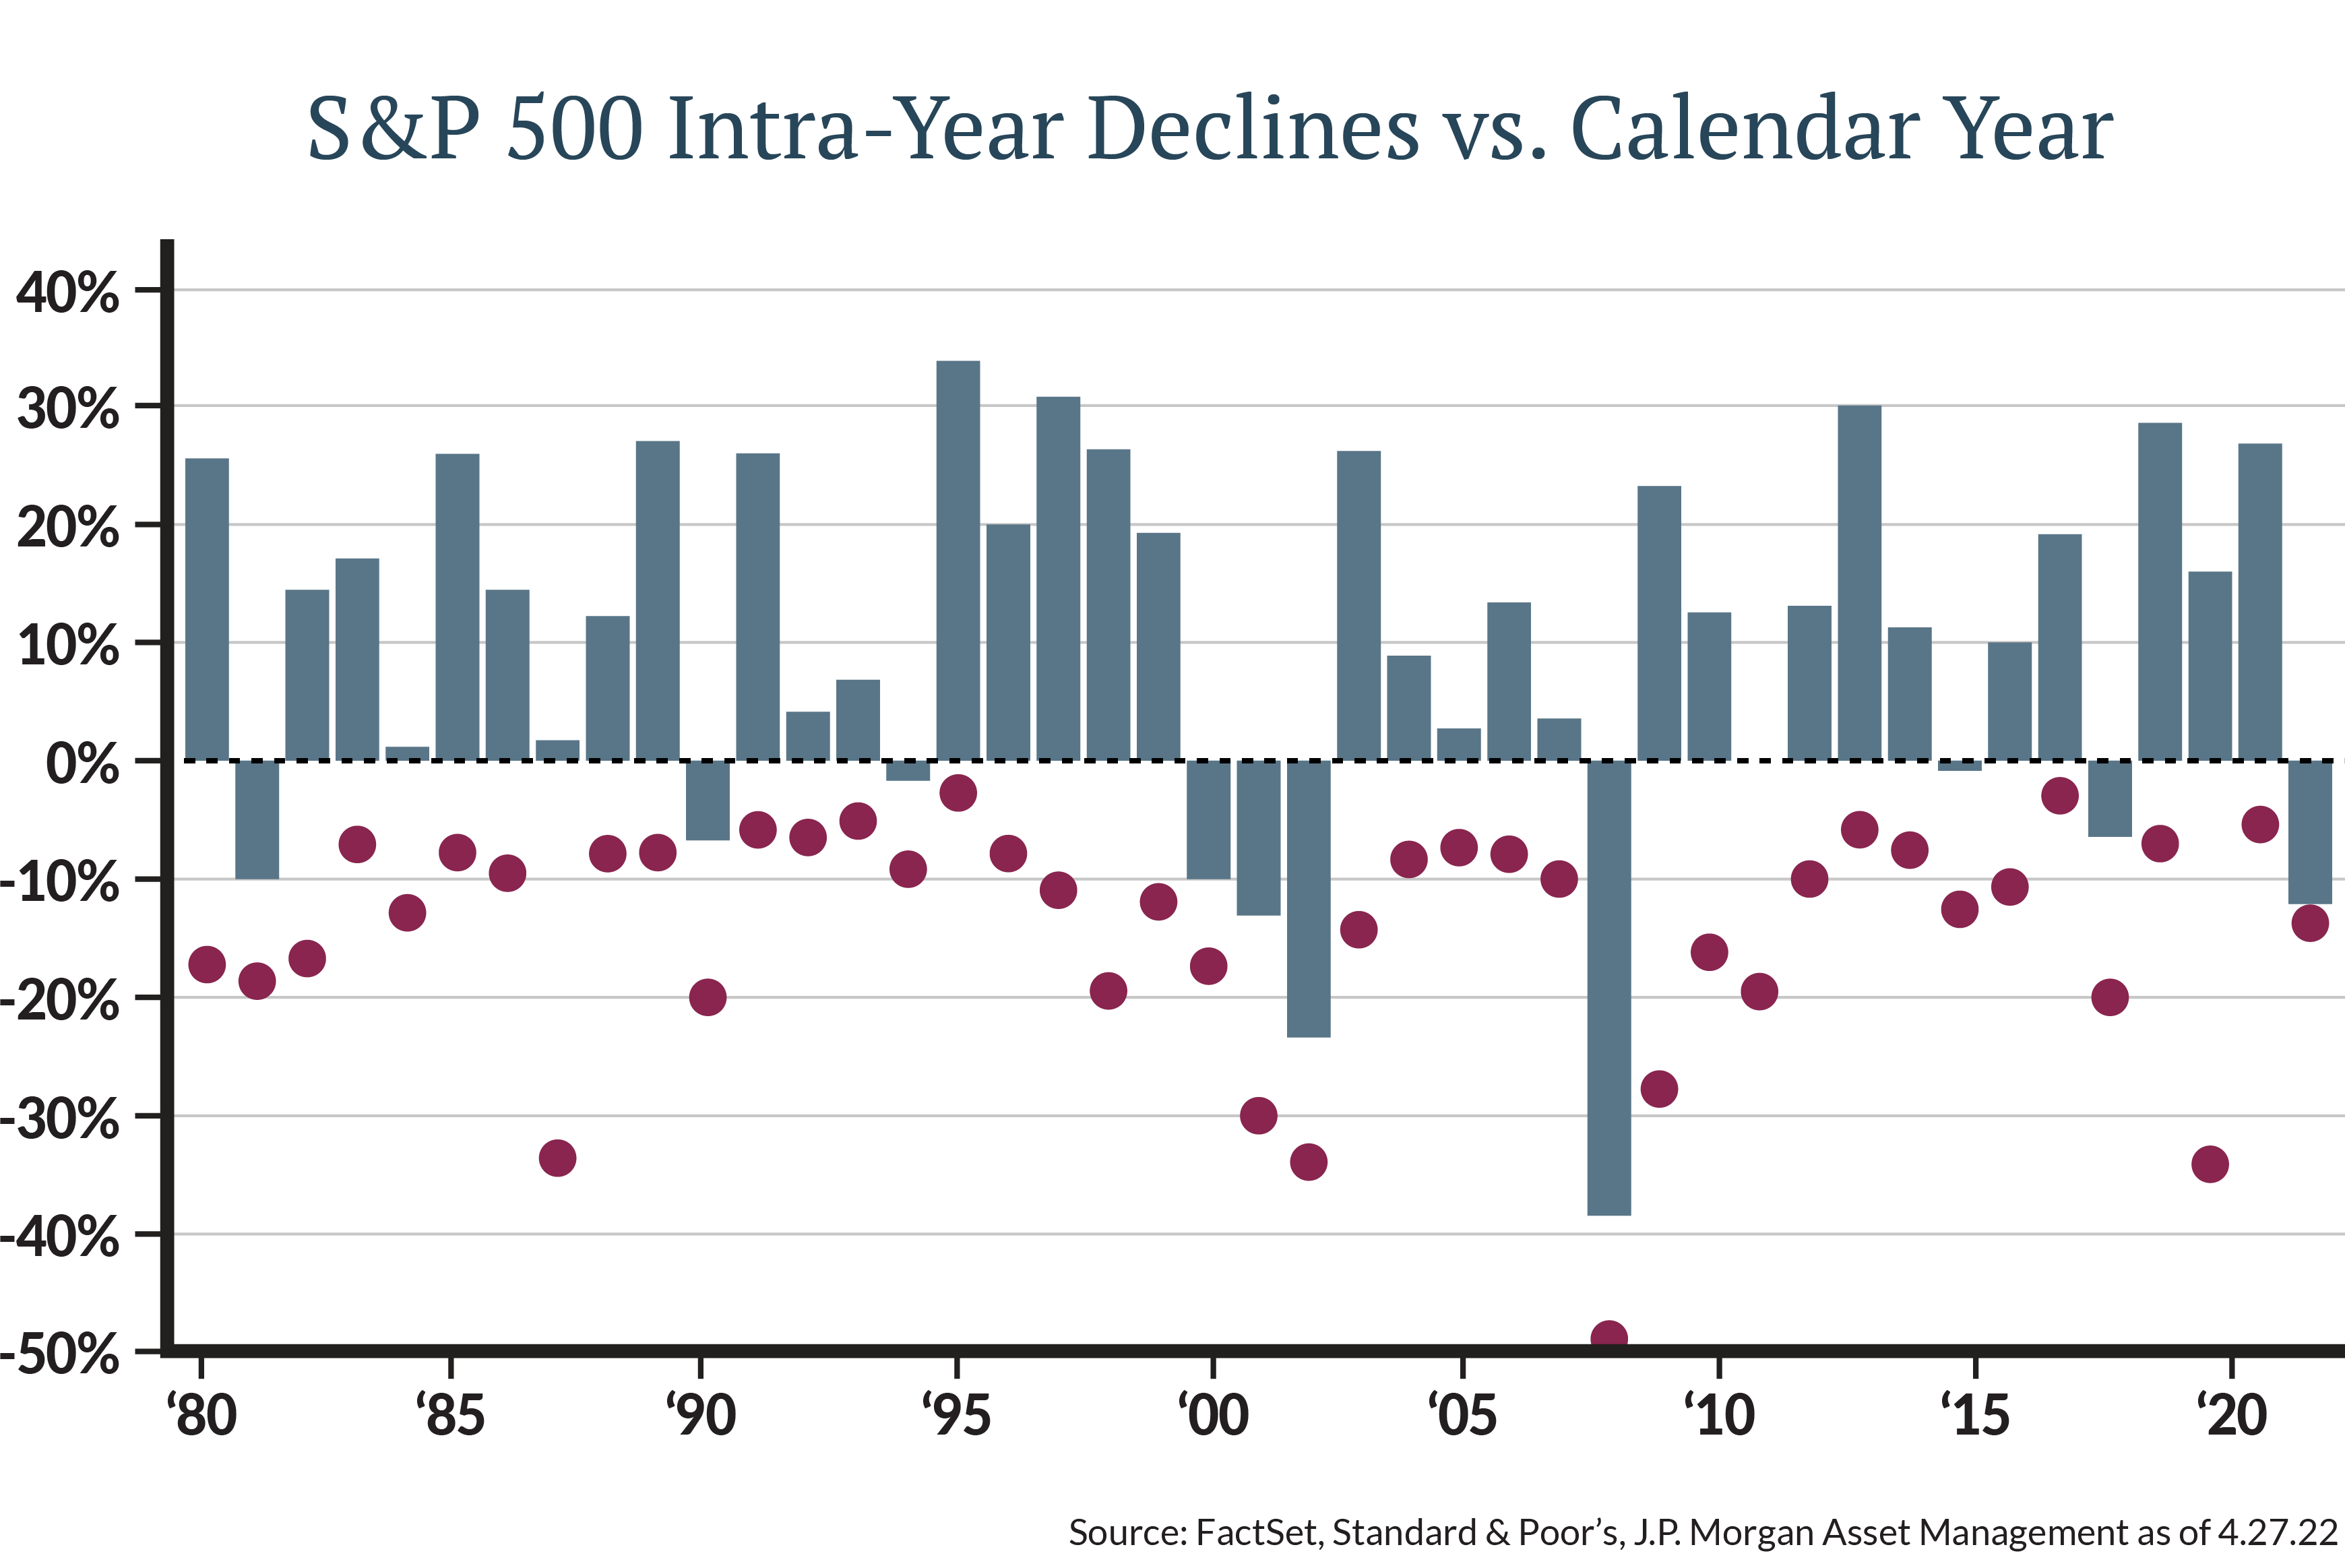 In the chart, you’ll see that even during those periods of positive calendar returns, for almost every year in history, there has been a decline from peak to trough in the stock market of greater than -5%.